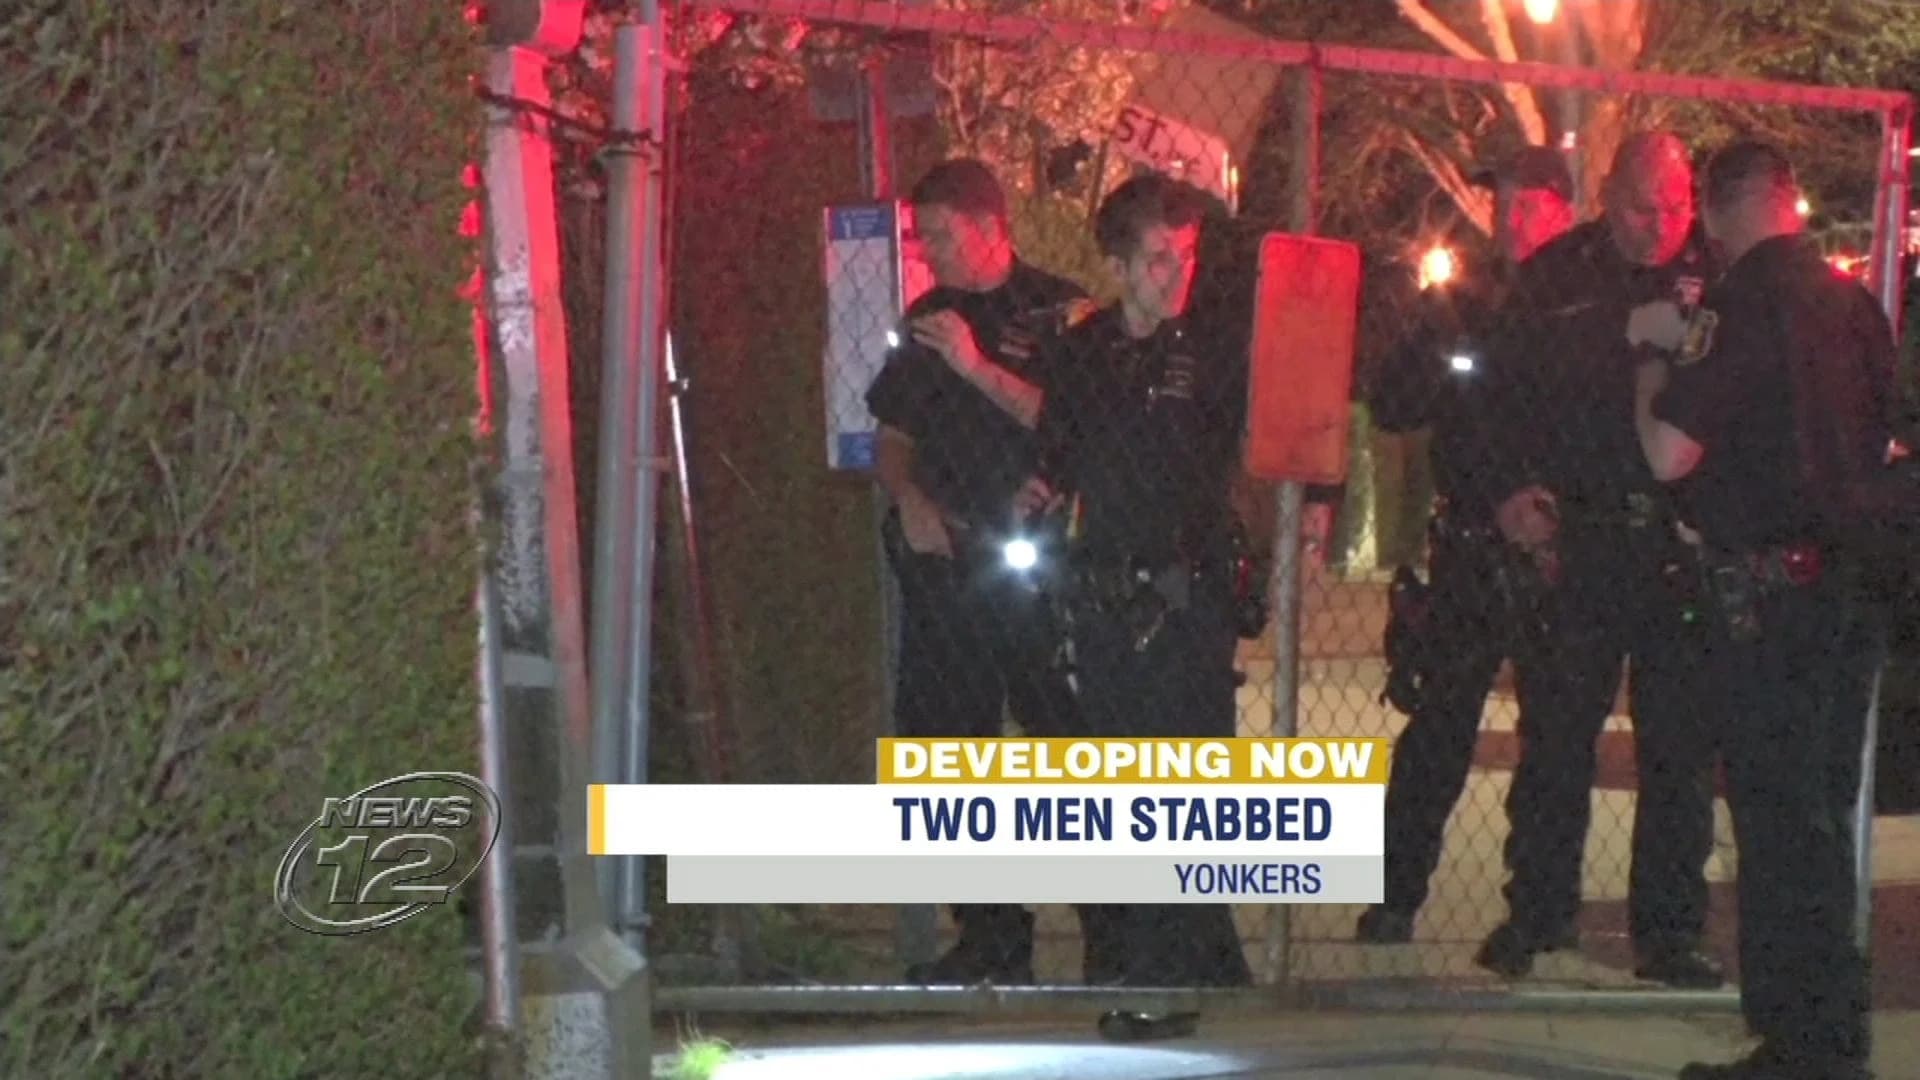 Two more people stabbed in Yonkers